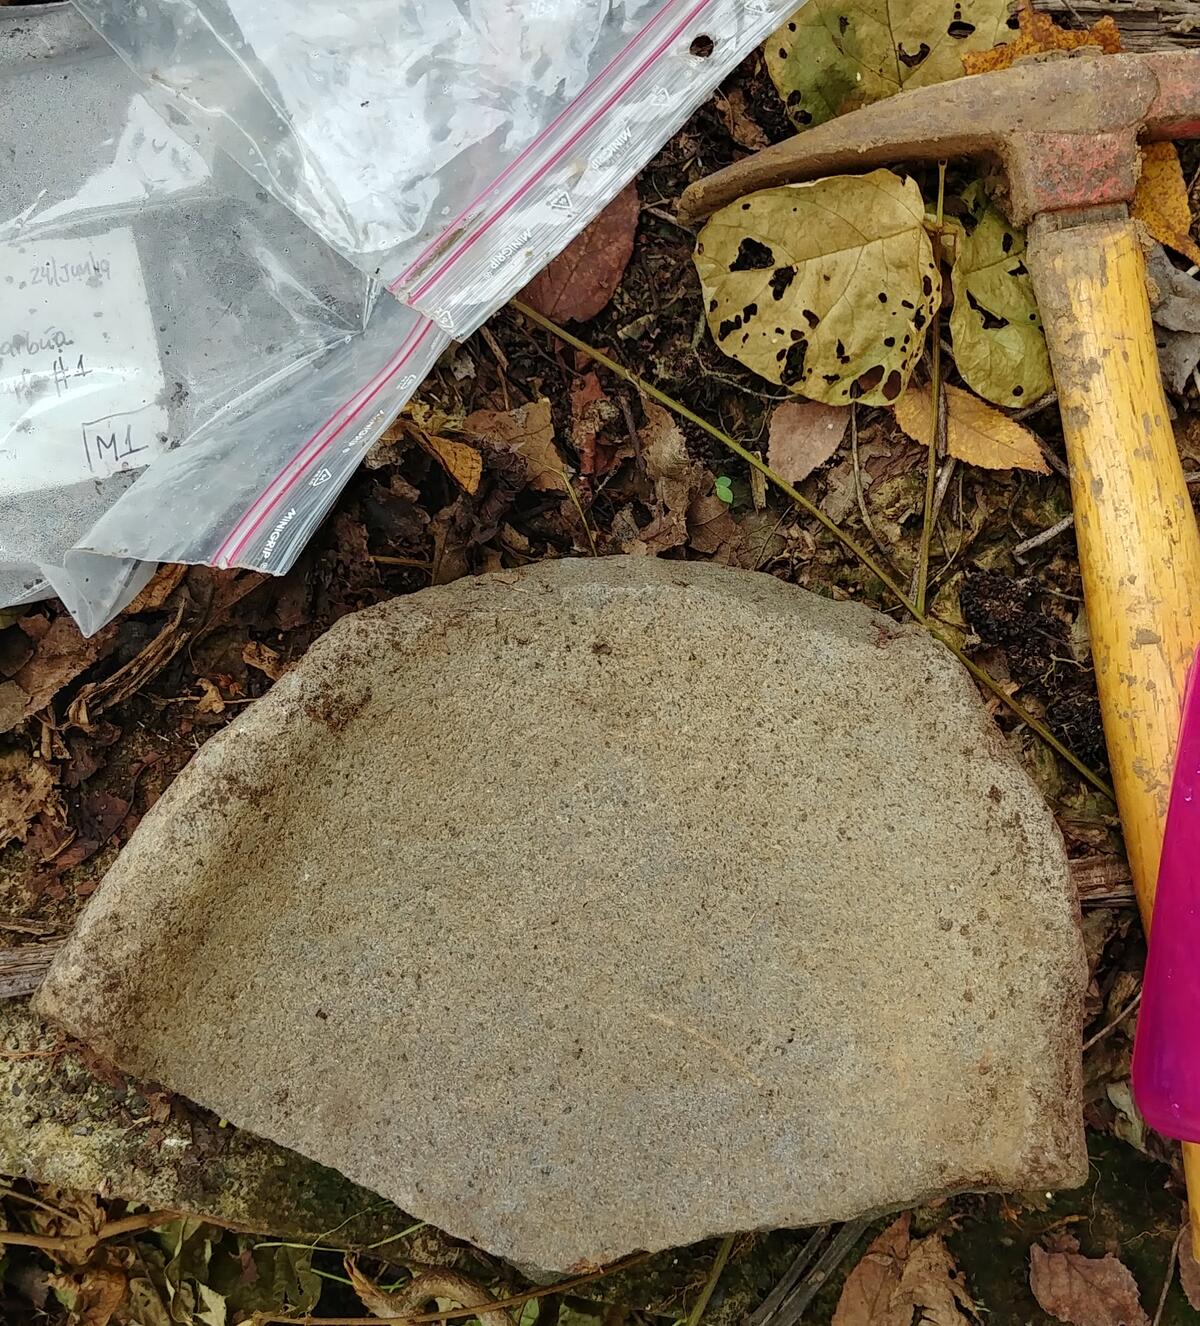 flat stone in half-circle shape, hammer-shaped object, plastic bags